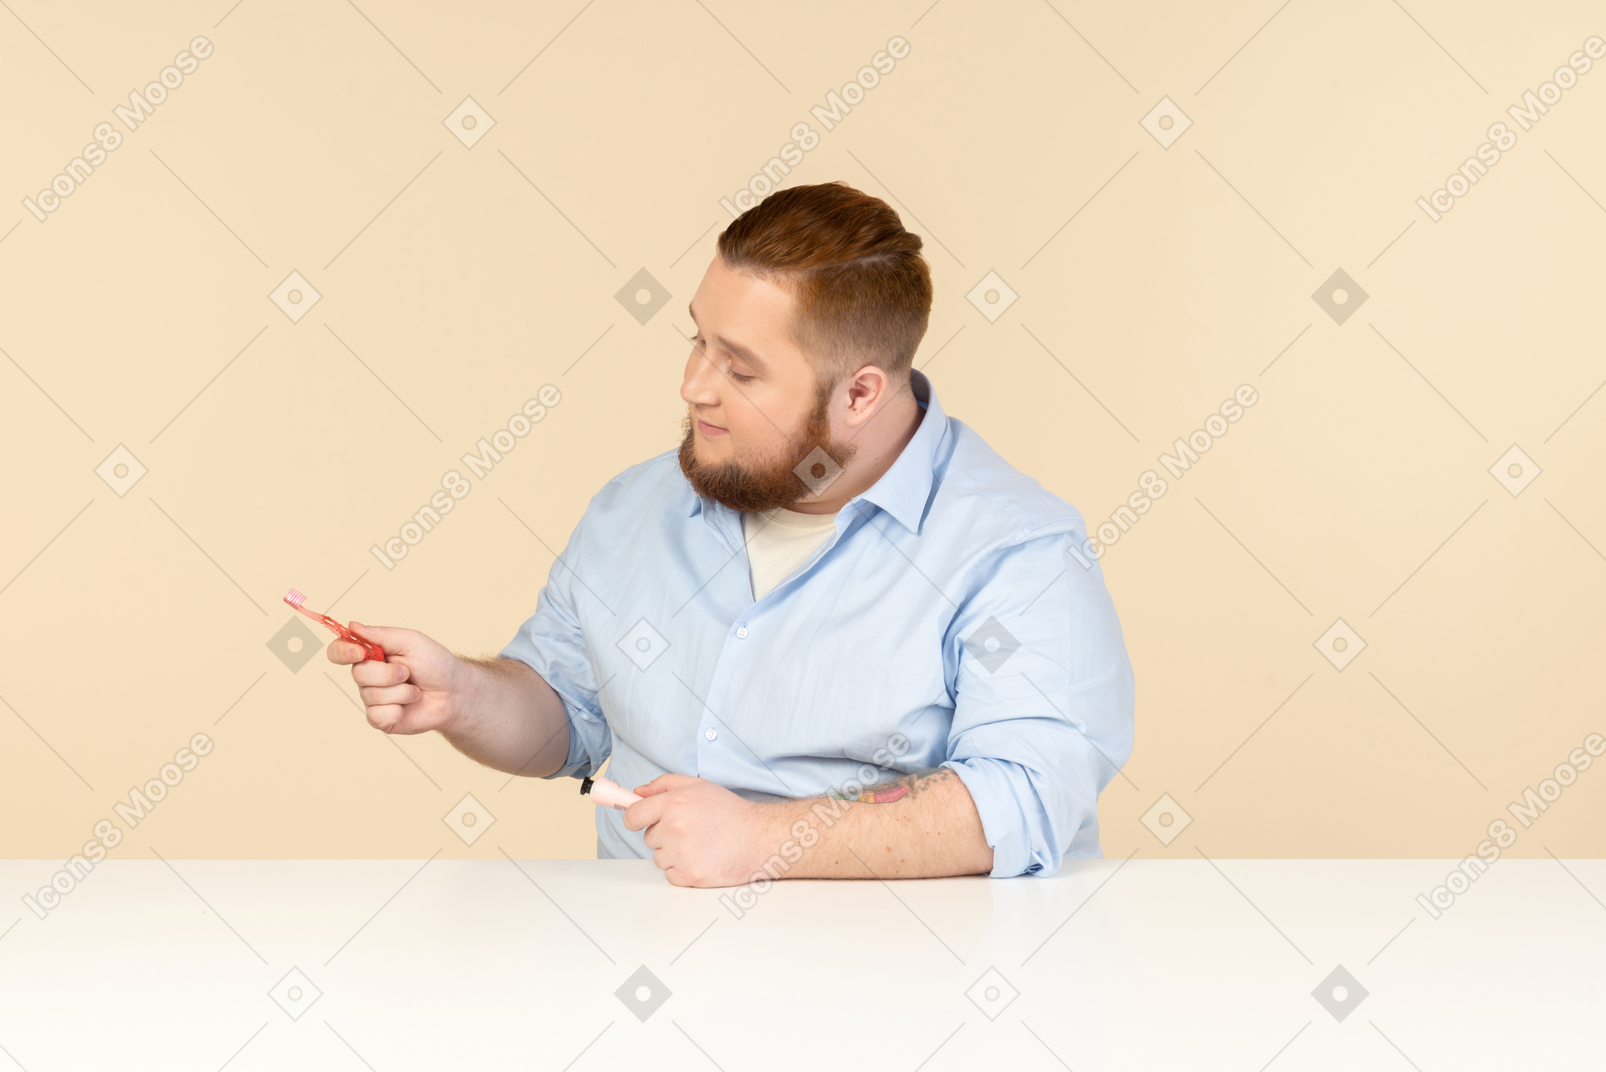 Big man sitting at the table and holding toothpaste and toothbrush